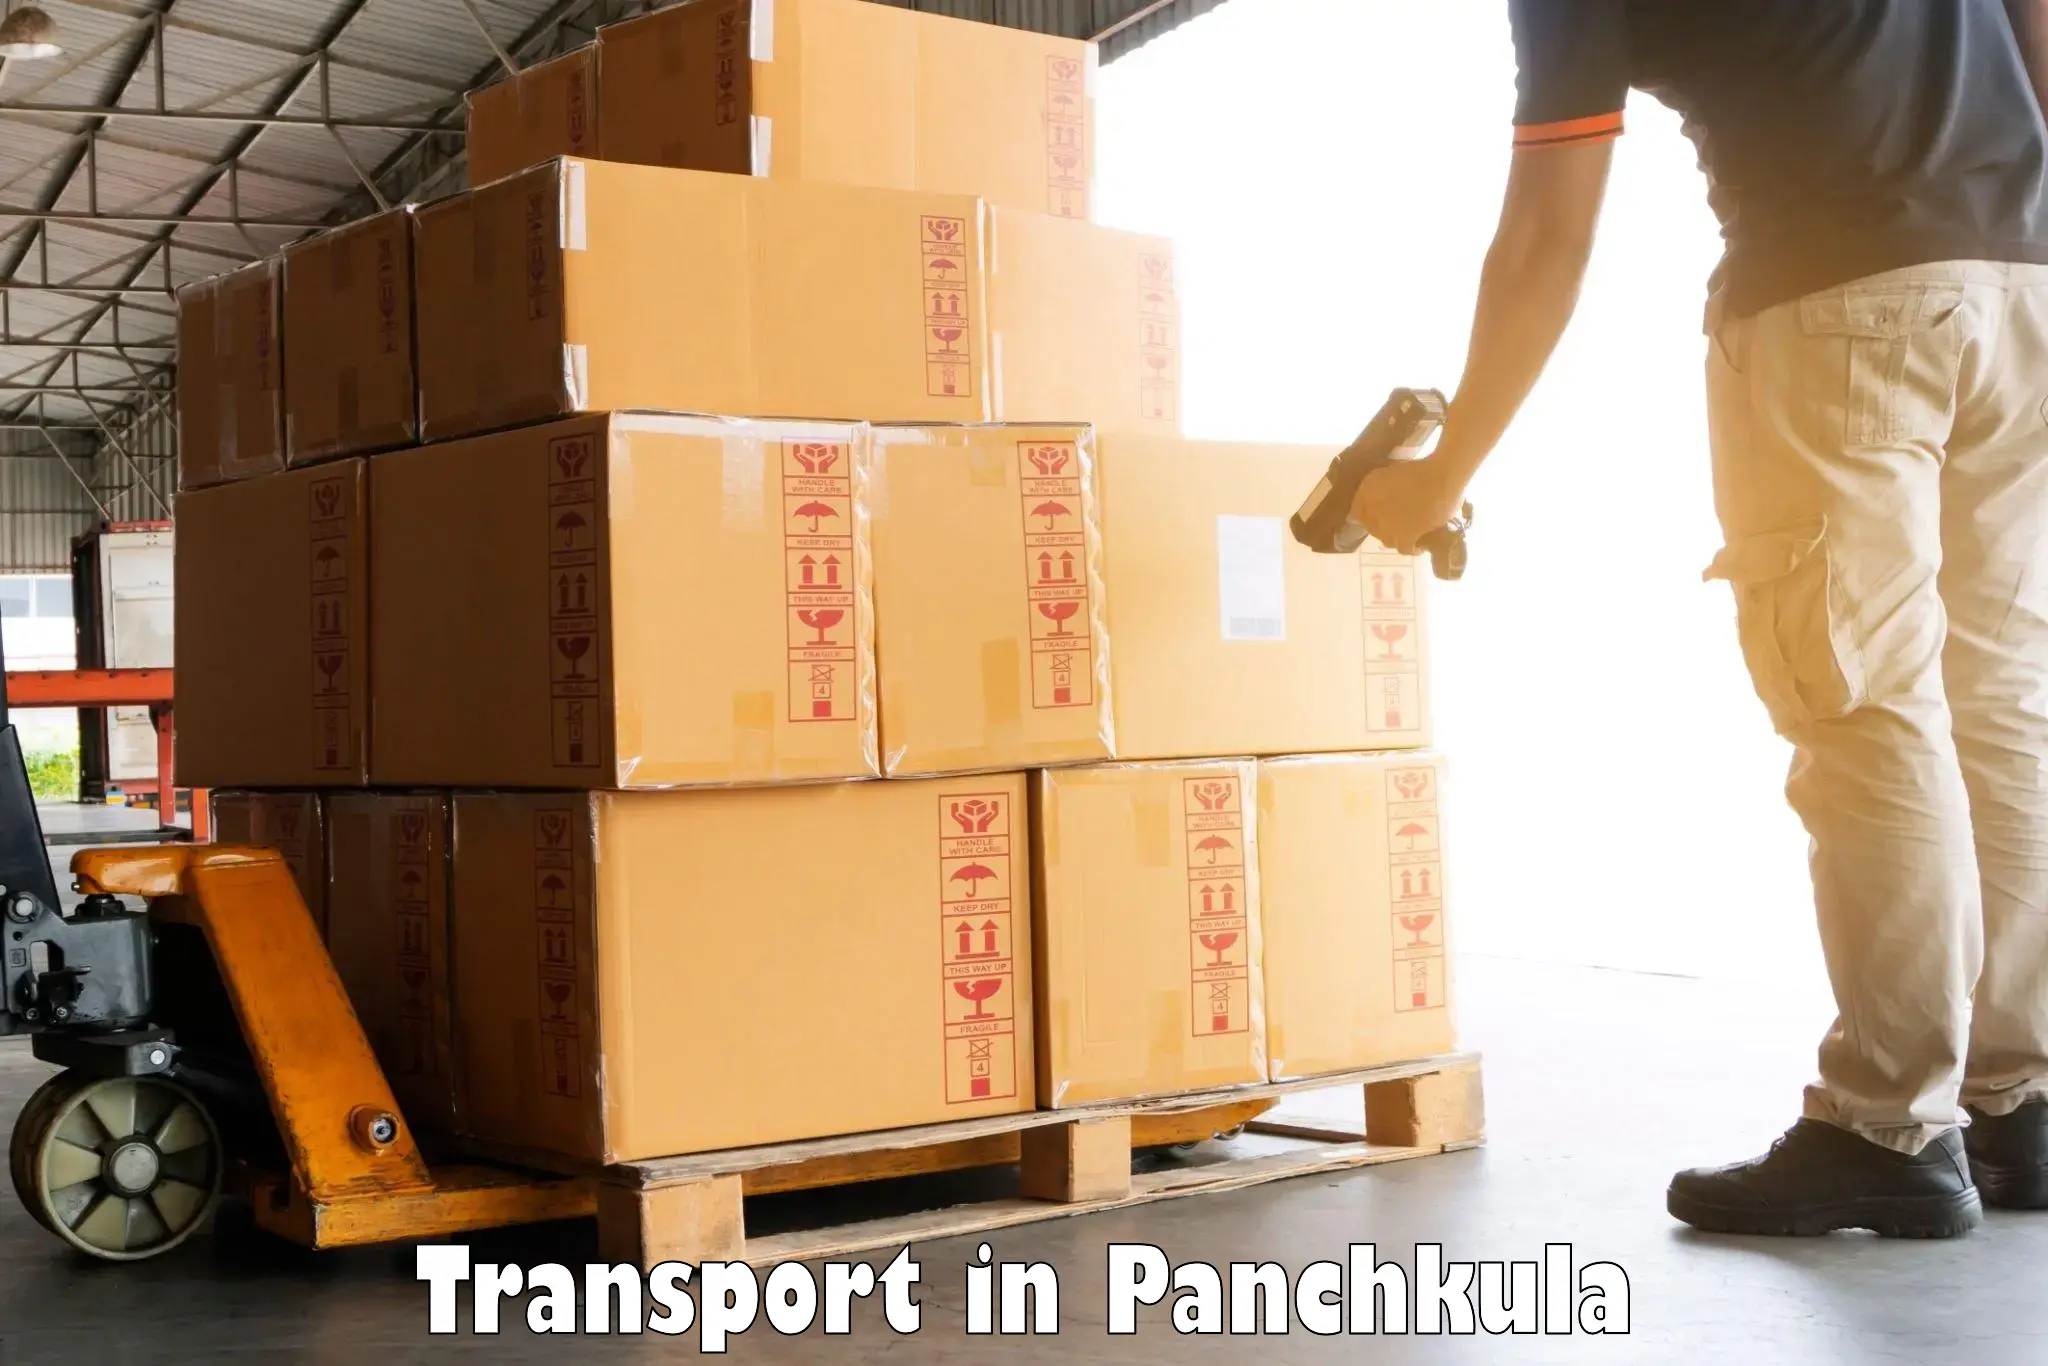 Vehicle transport services in Panchkula